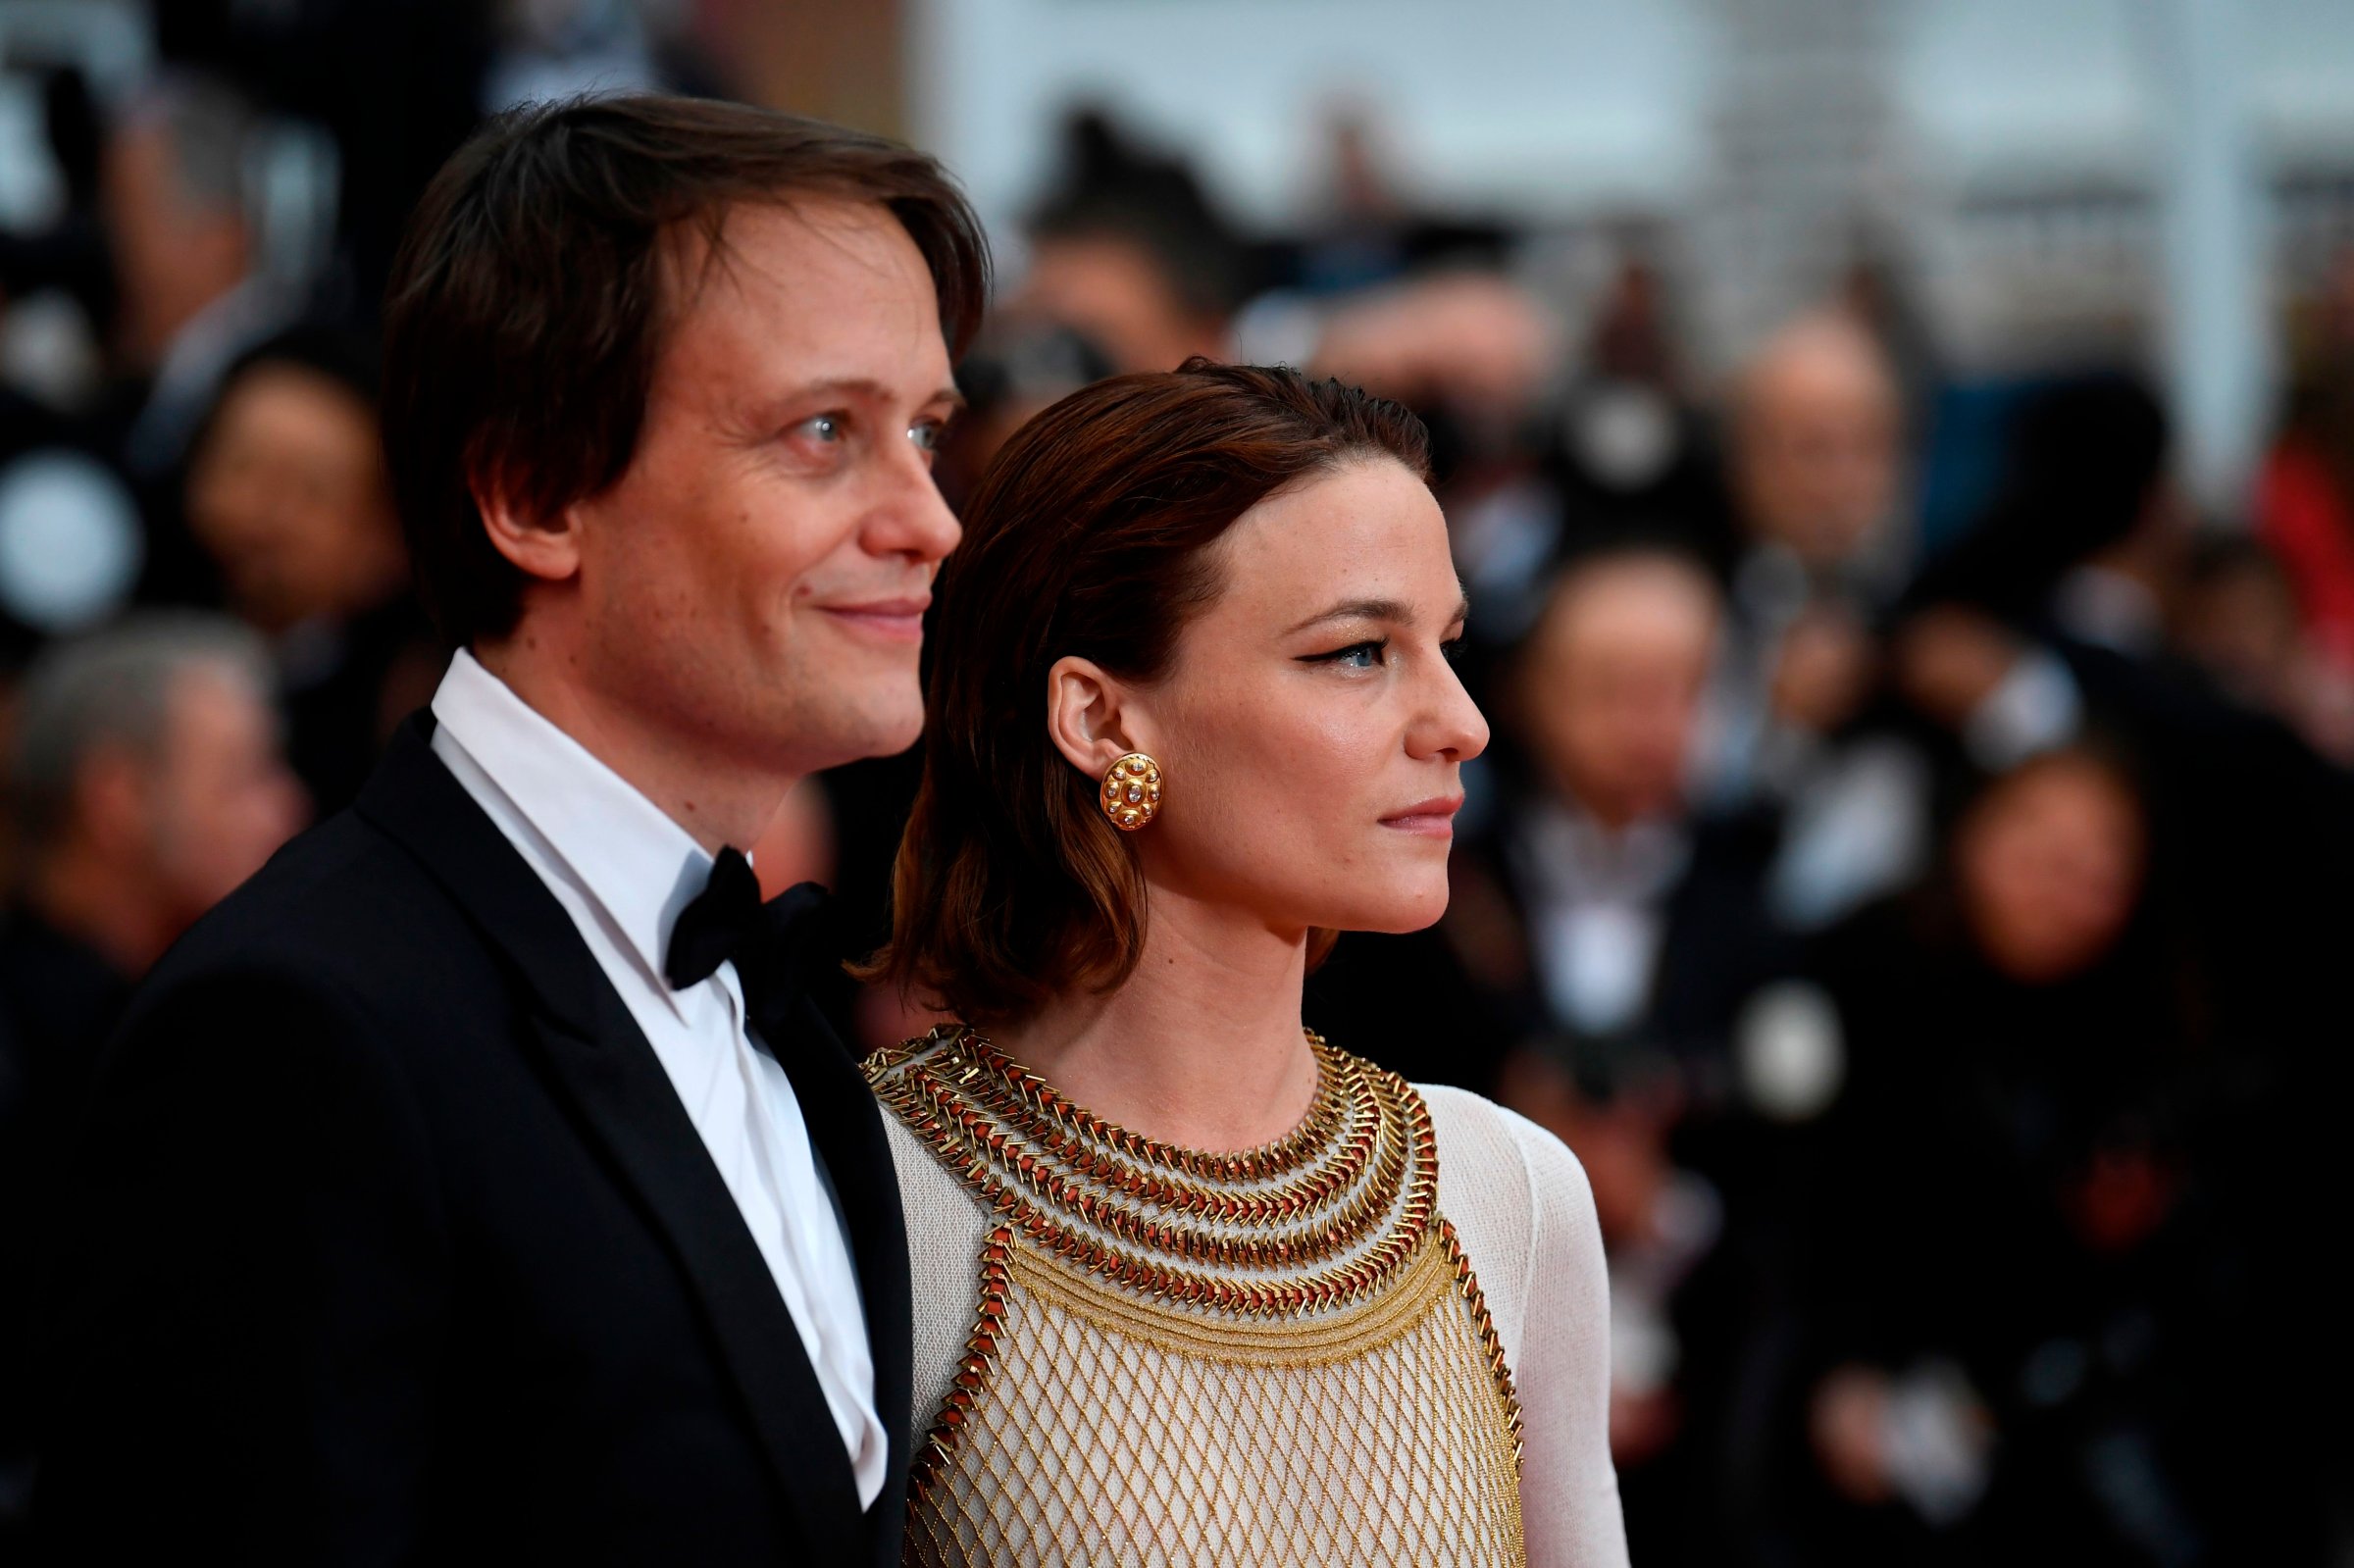 German actor August Diehl and Austrian actress Valerie Pachner arrive for the screening of the film "A Hidden Life" at the 72nd edition of the Cannes Film Festival on May 19, 2019.